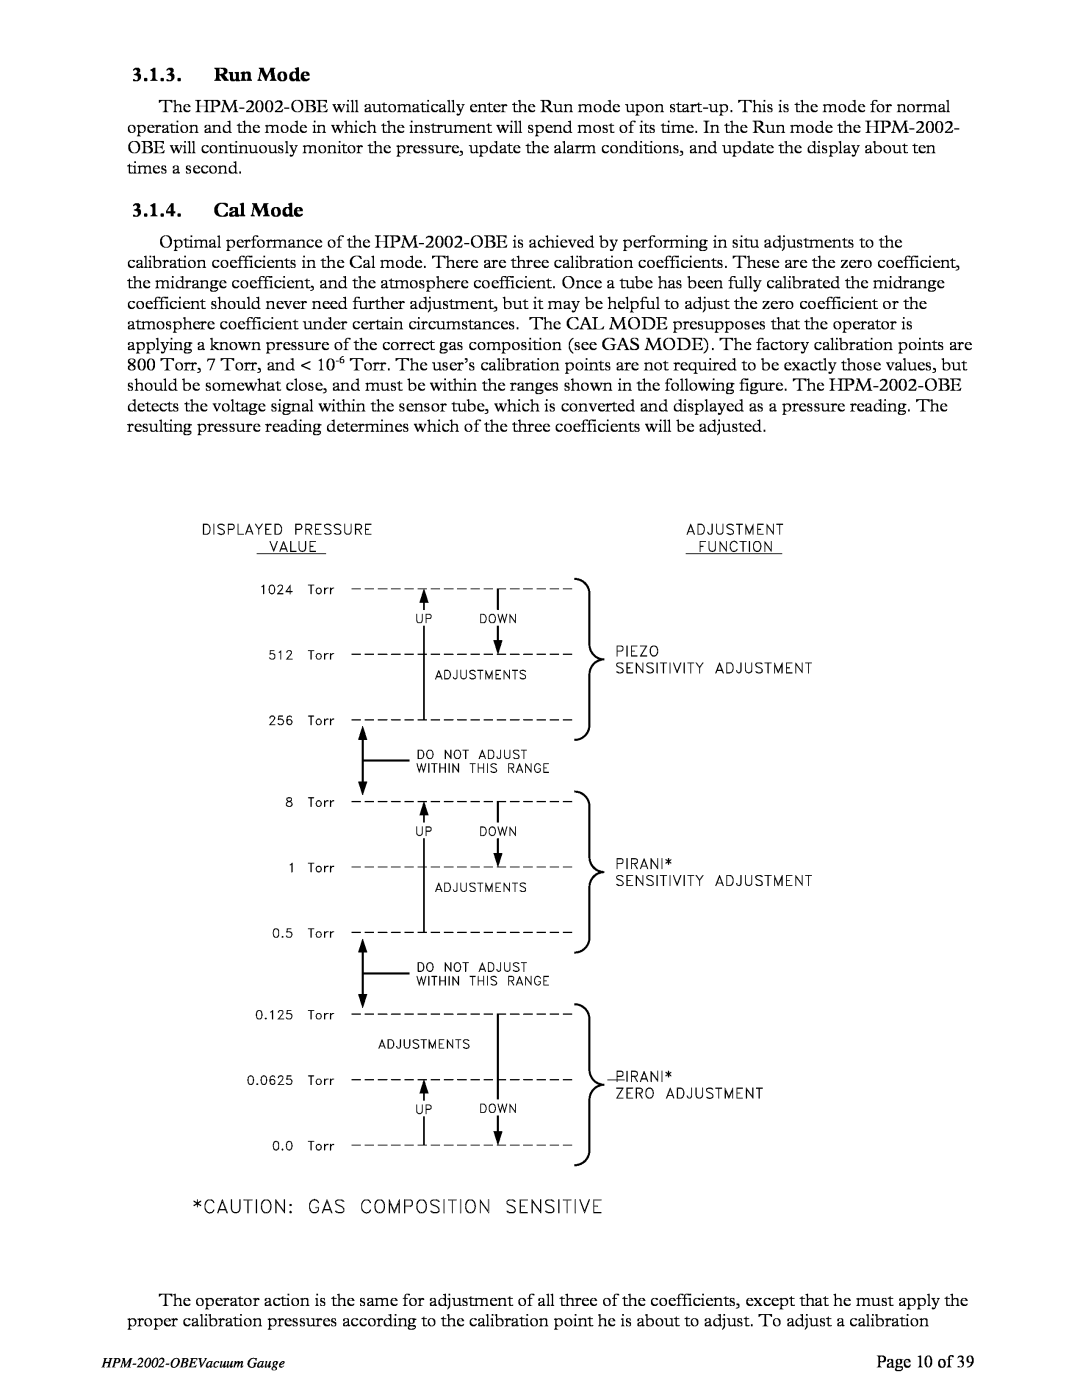 Teledyne HPM-2002-OBE instruction manual Run Mode, Cal Mode, Page 10 of 